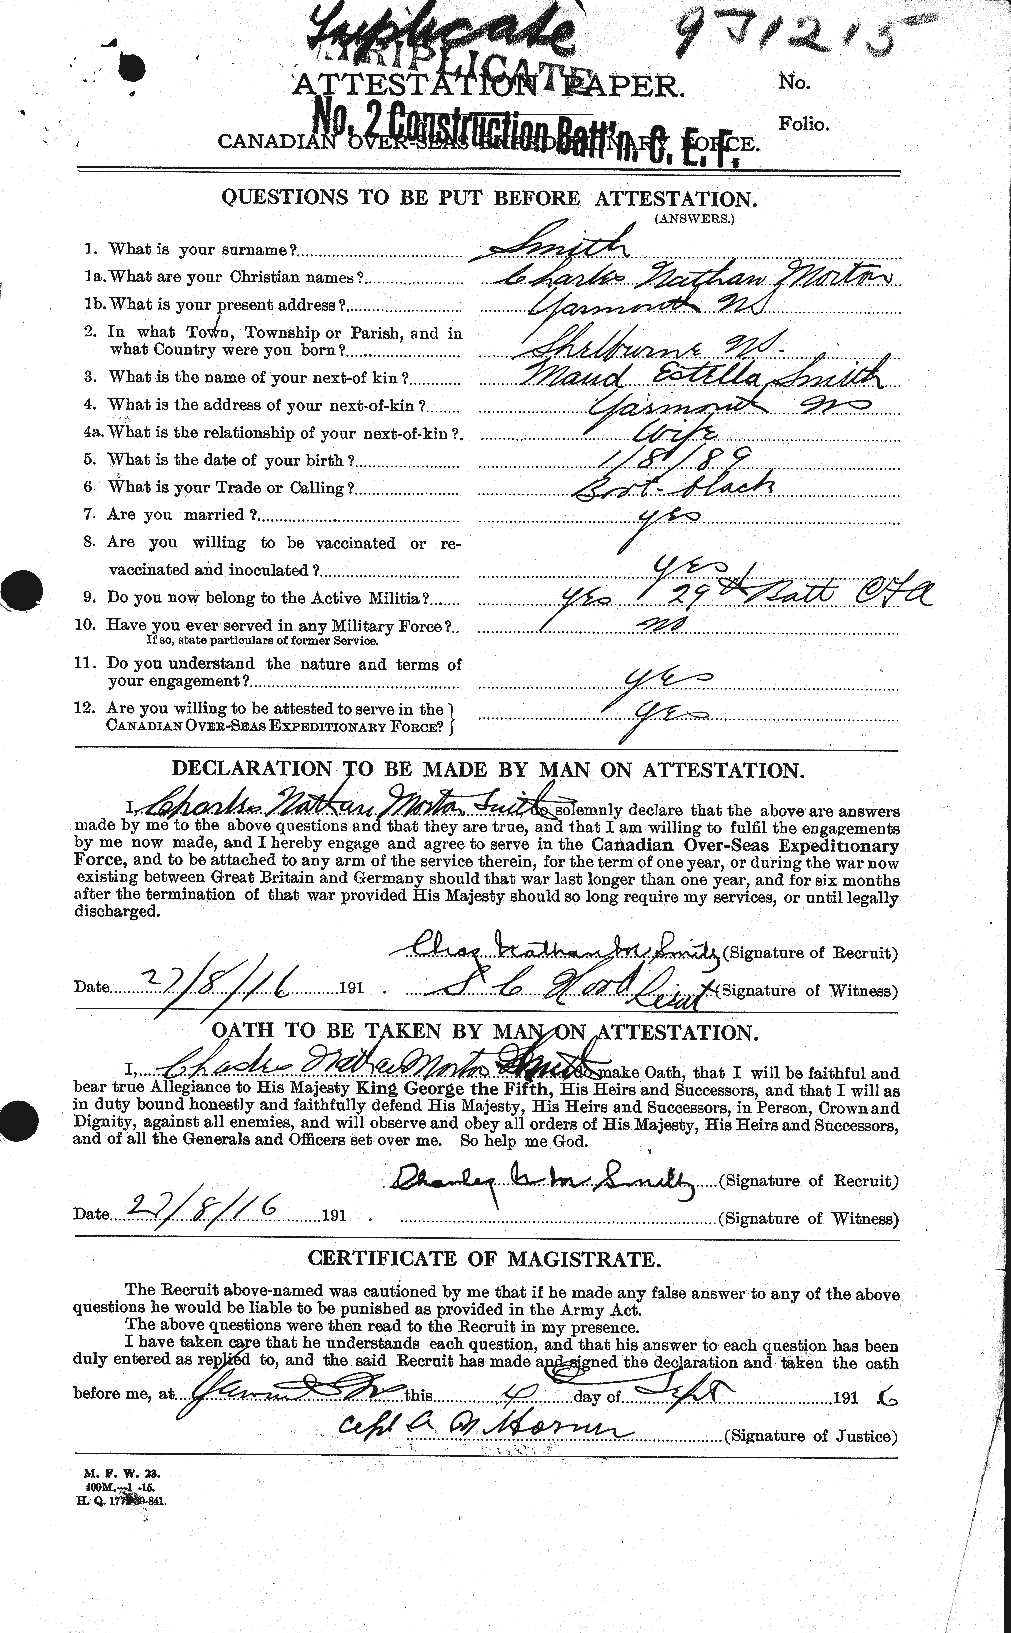 Personnel Records of the First World War - CEF 104374a